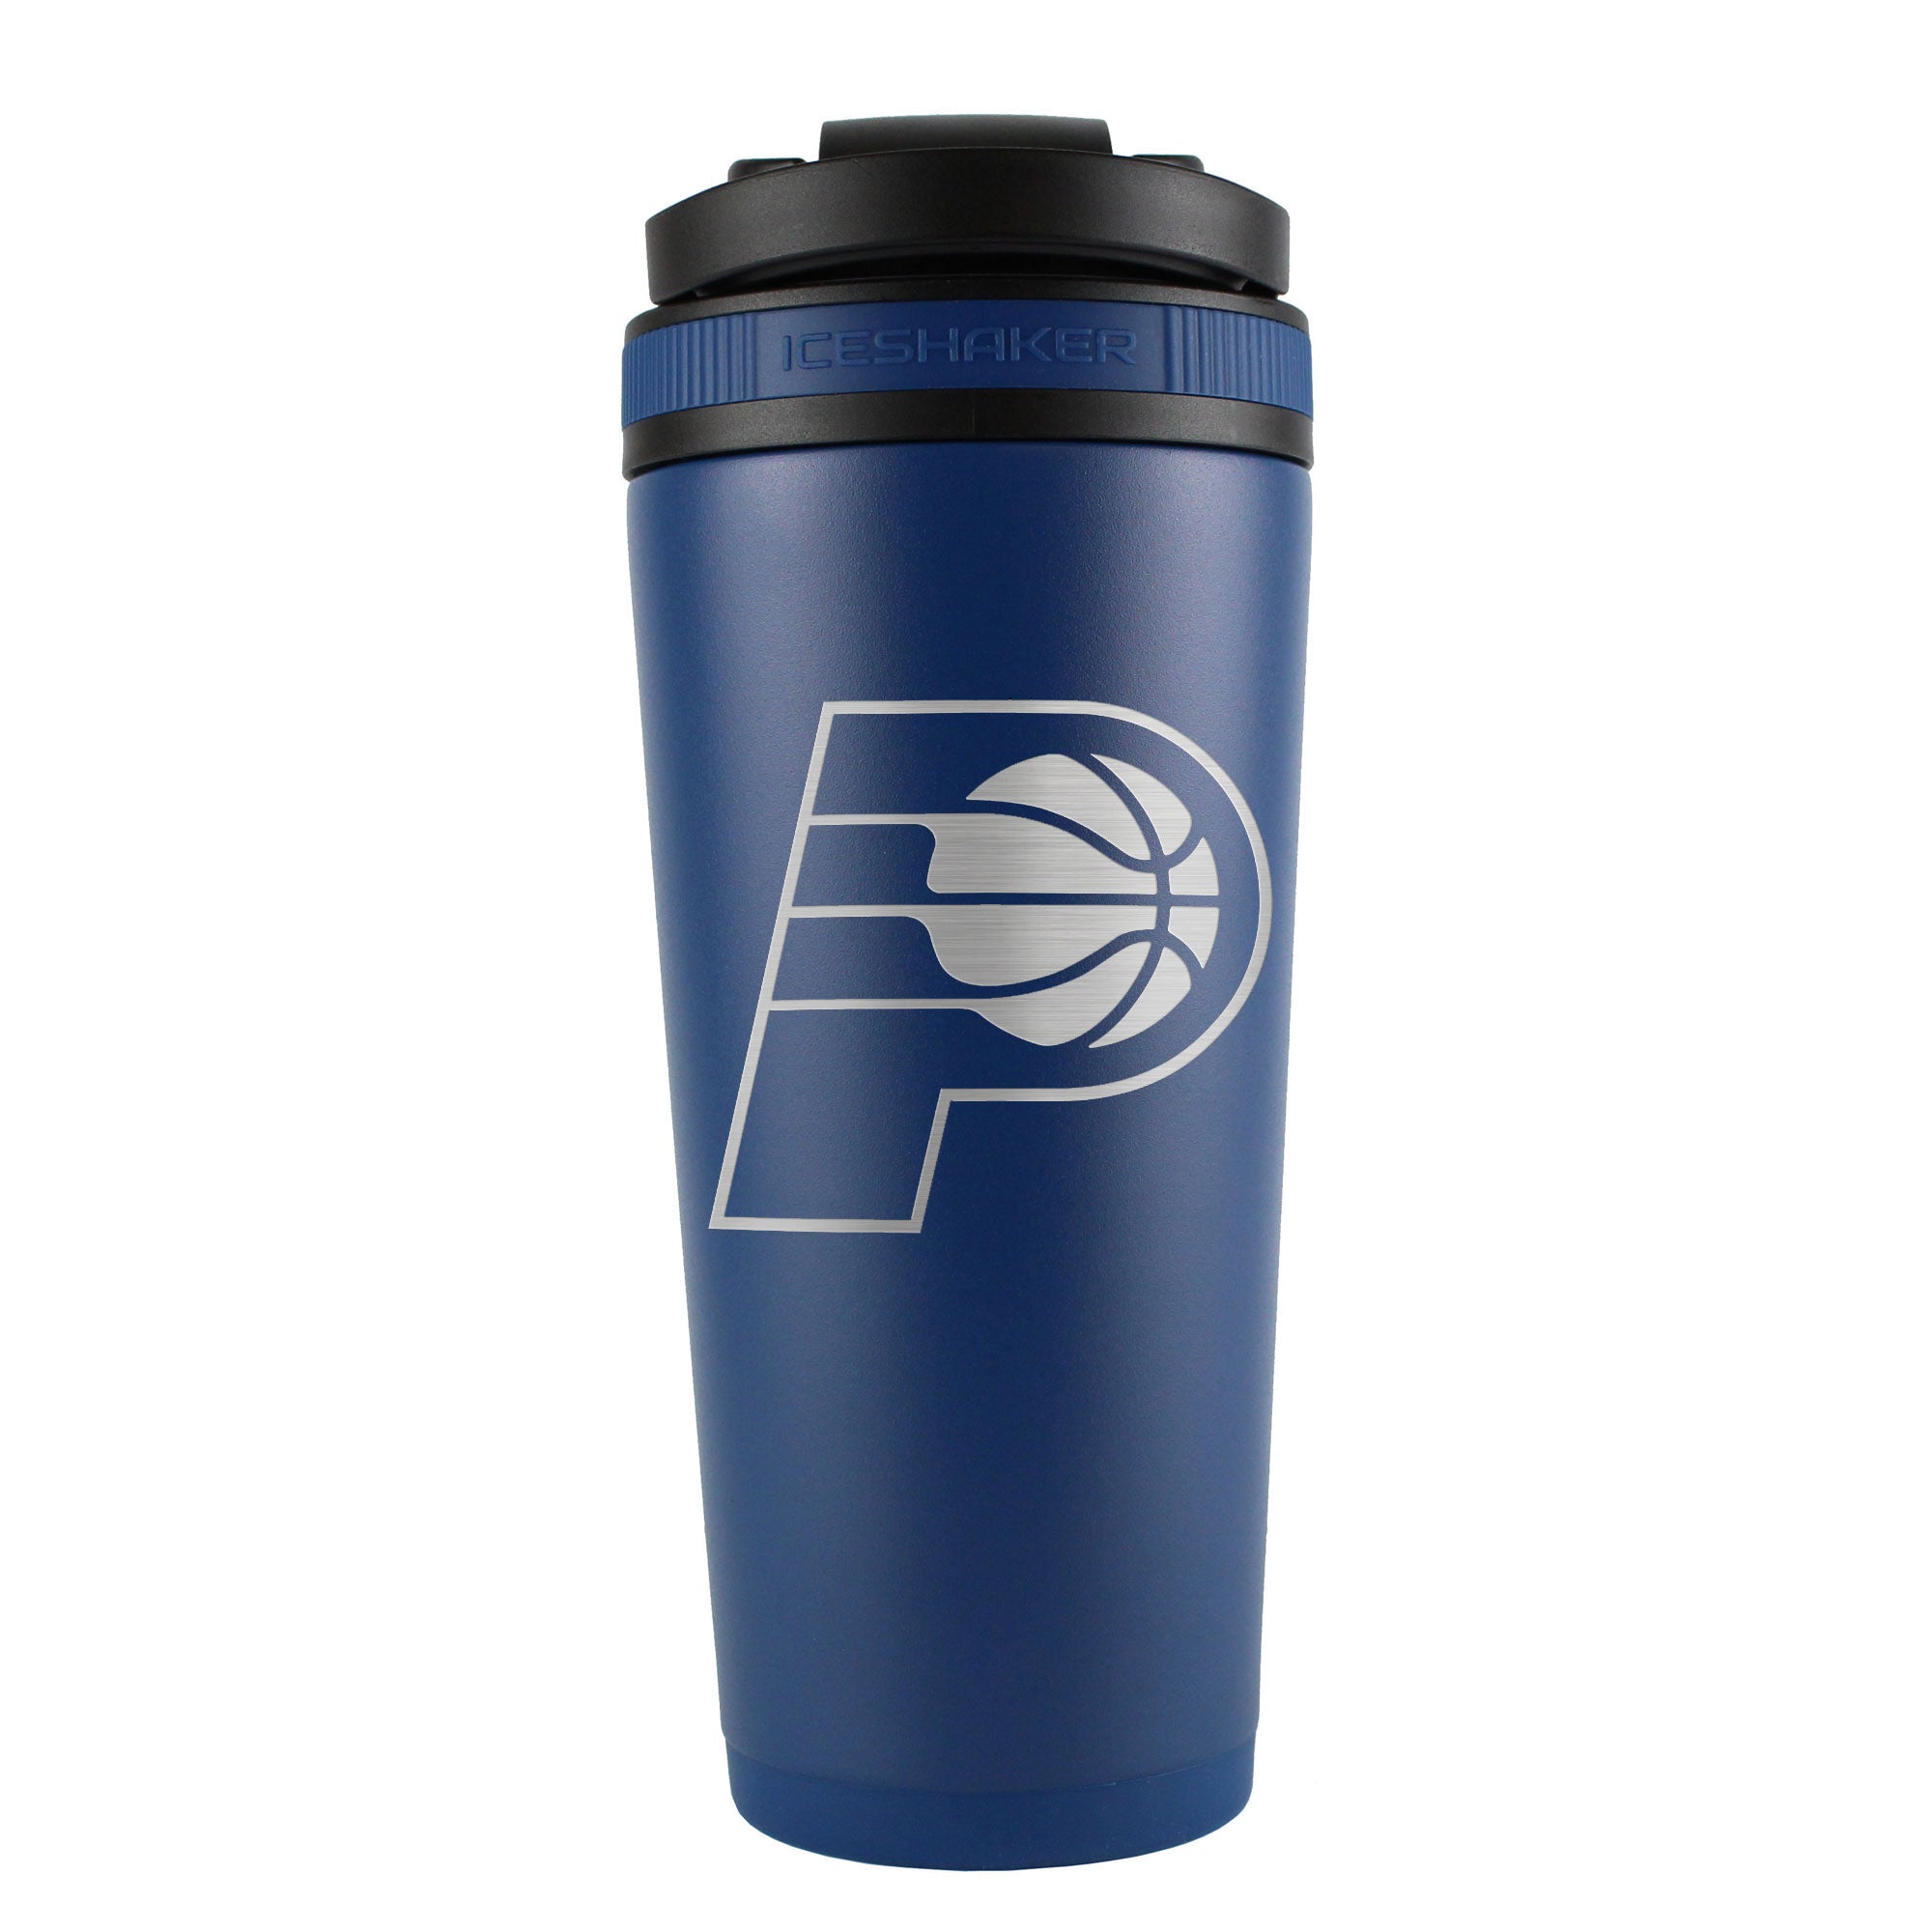 Officially Licensed Indiana Pacers 26oz Ice Shaker